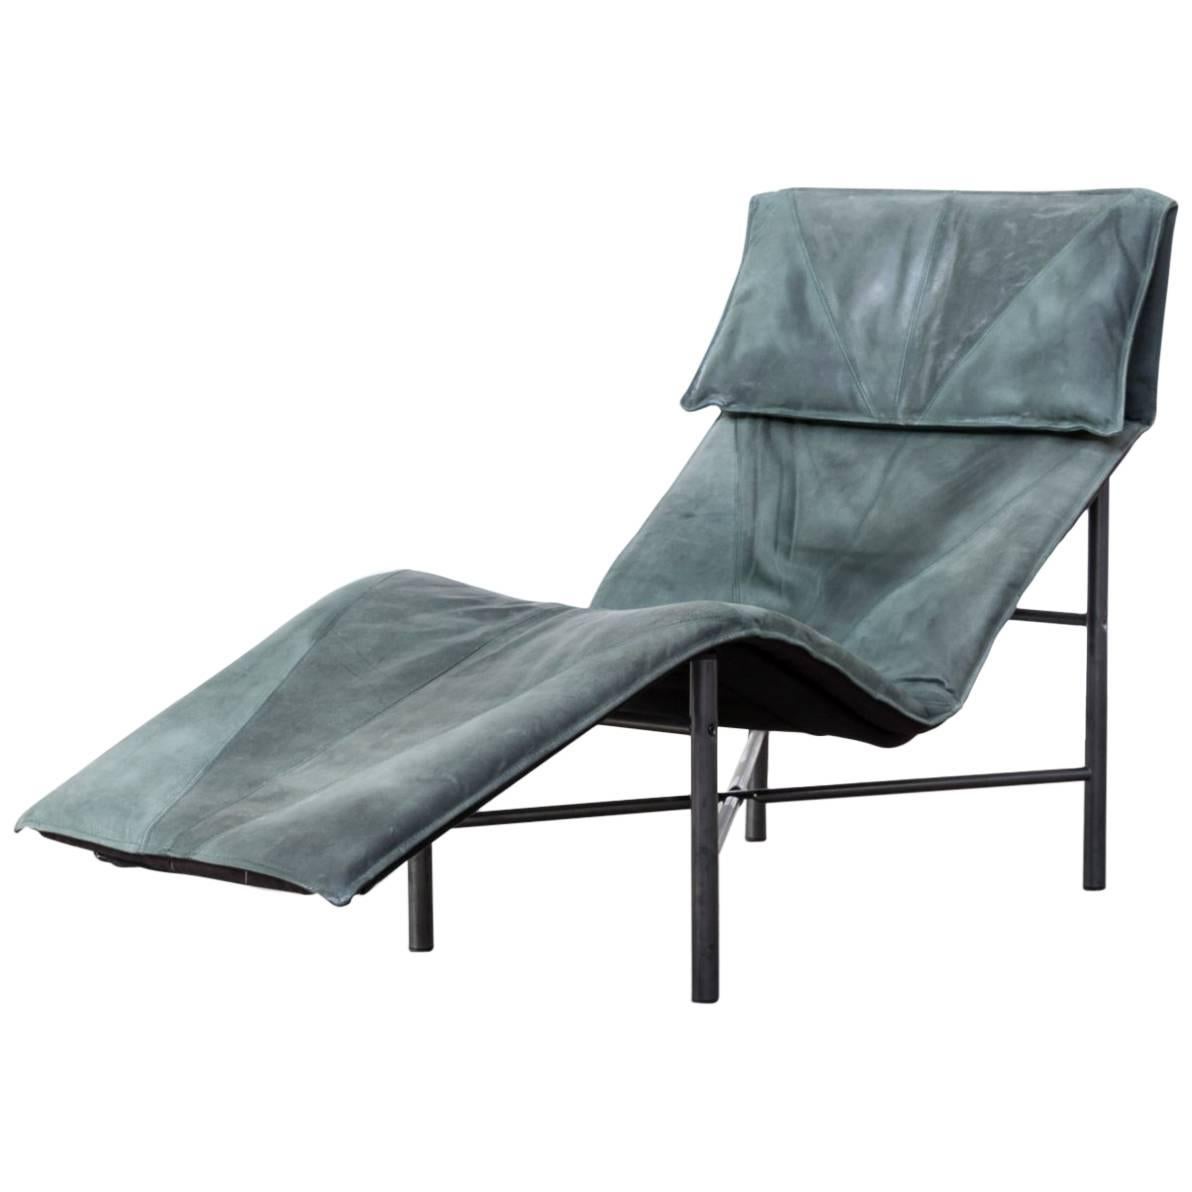 1980s Tord Björklund ‘Skye’ Chaise Longue Chair Leather For Sale